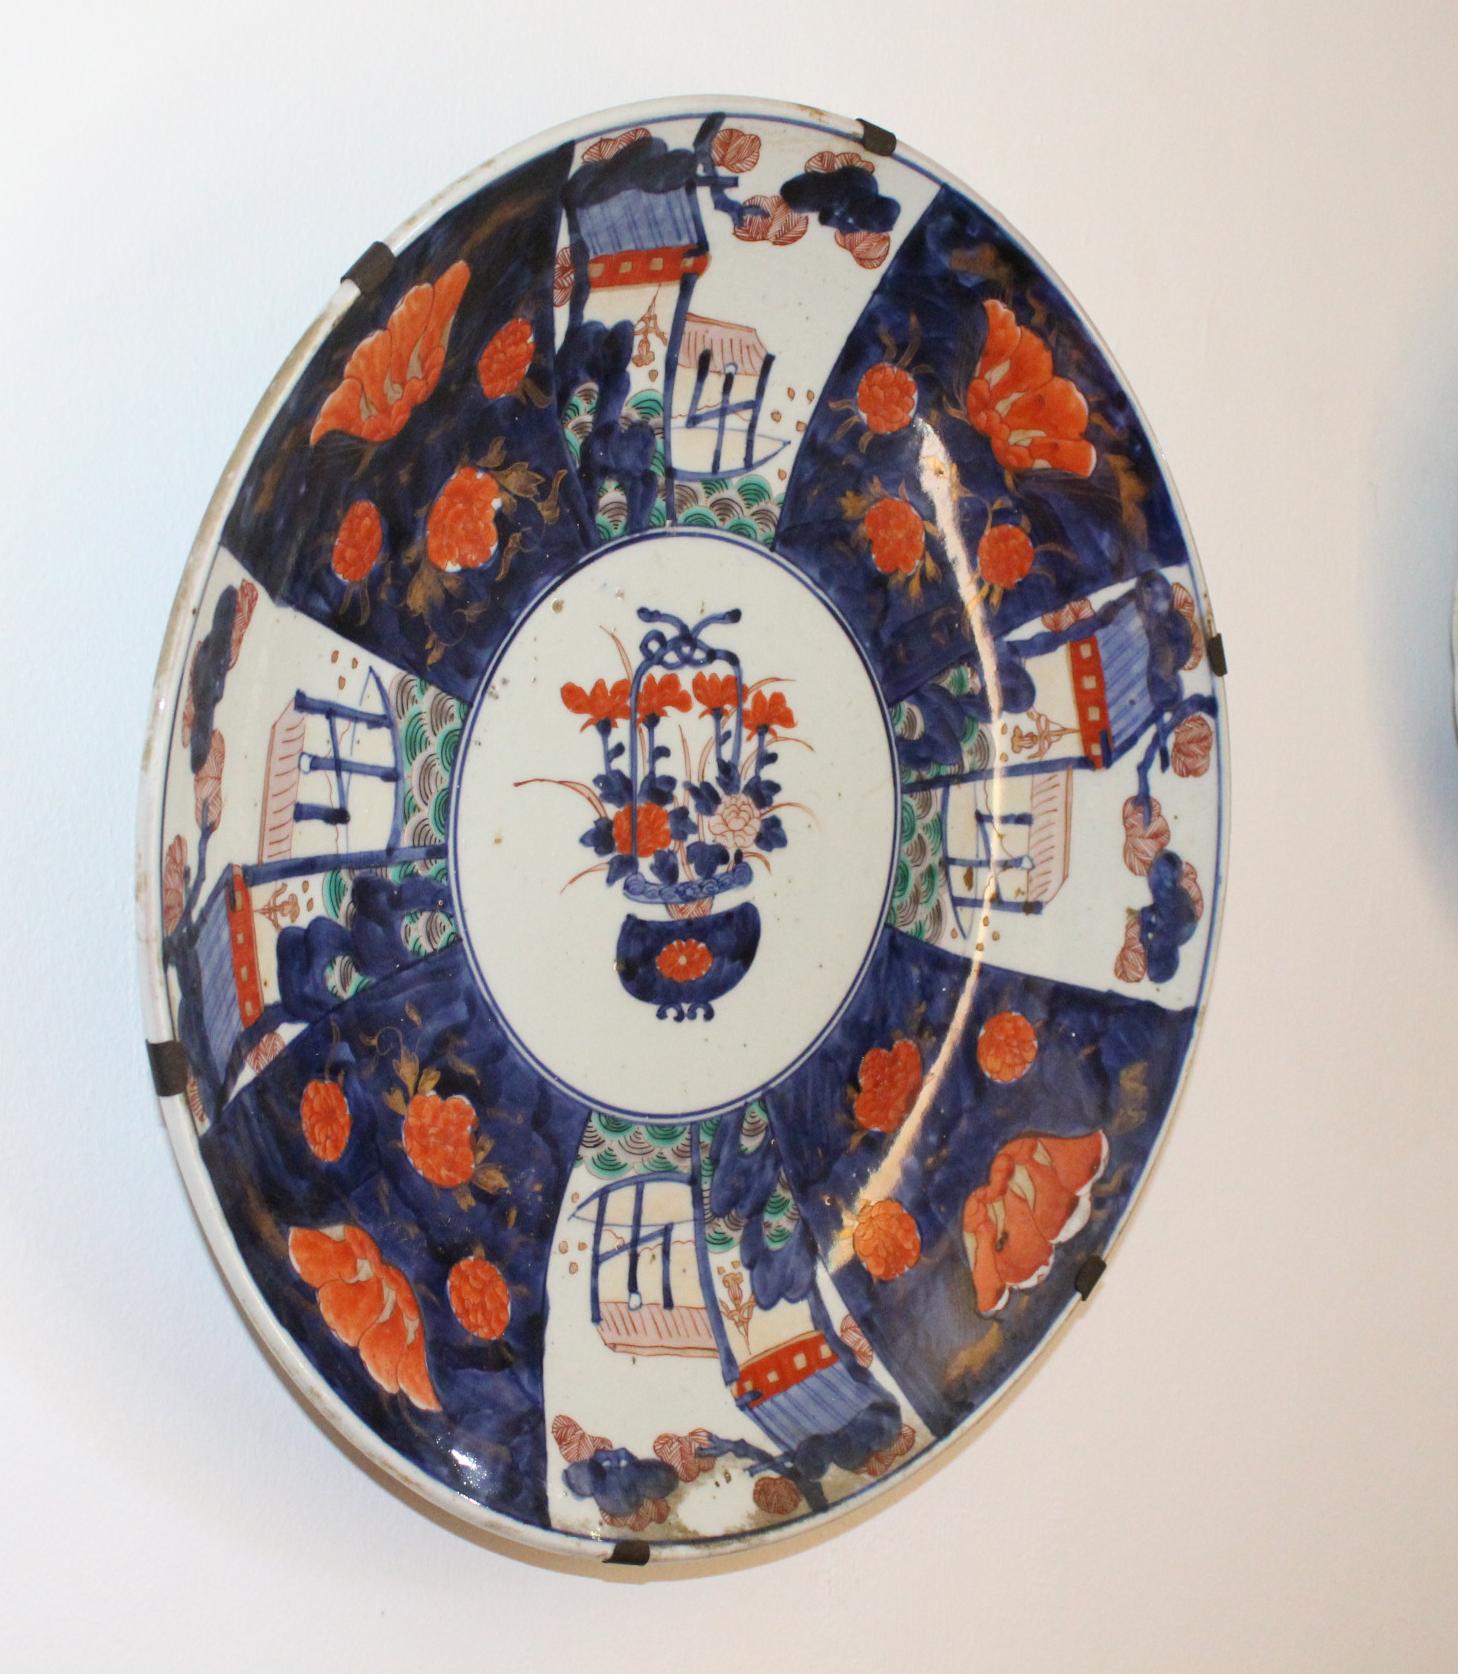 19th century Japanese Imari ware porcelain plate hand painted with typical flower motifs.

